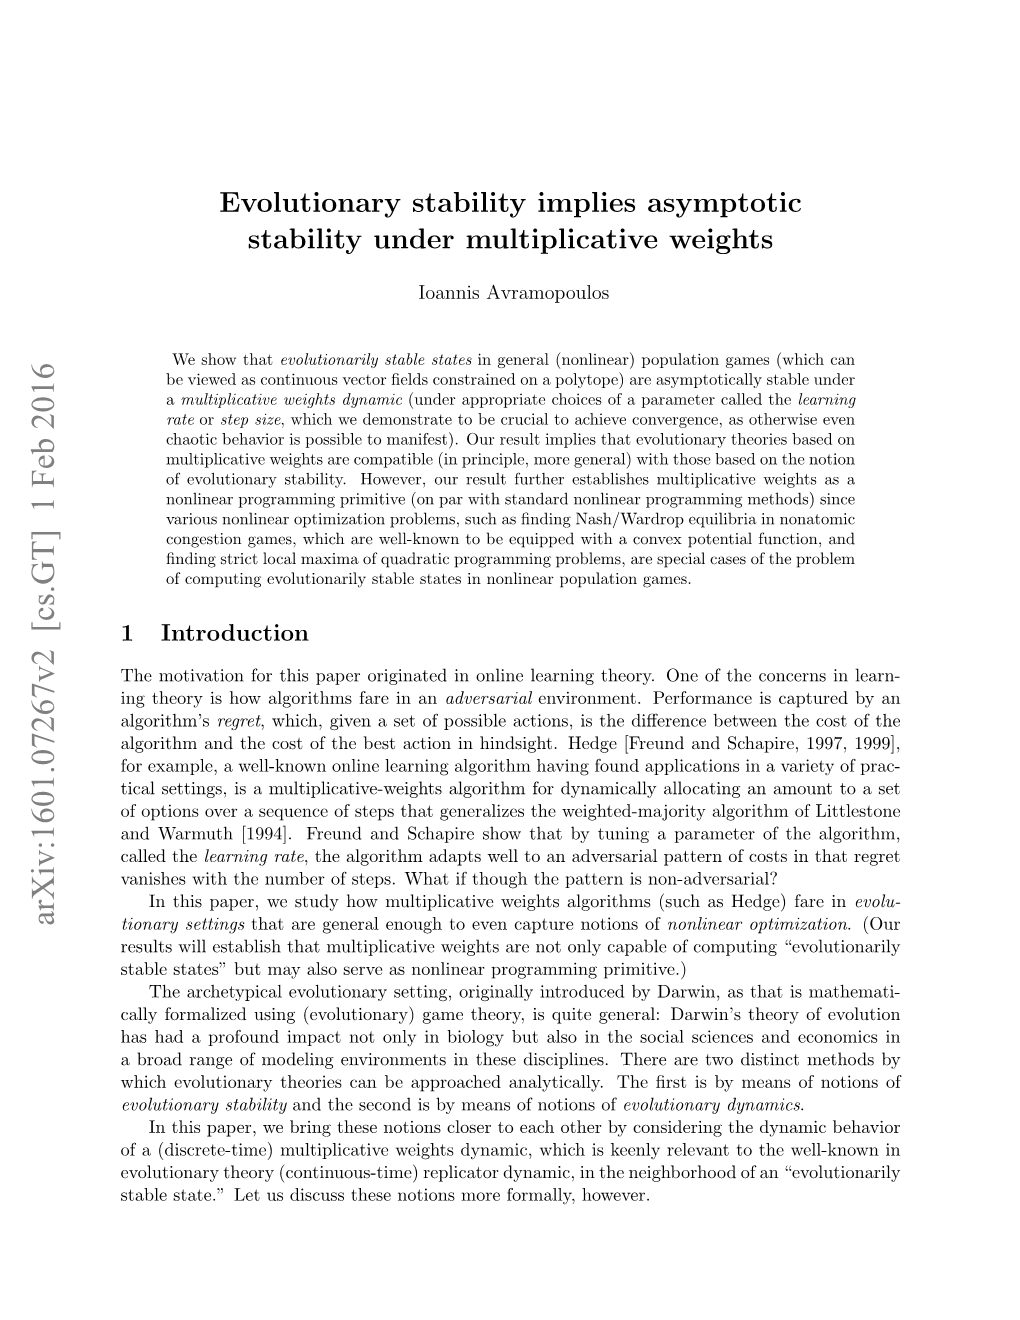 Evolutionary Stability Implies Asymptotic Stability Under Multiplicative Weights